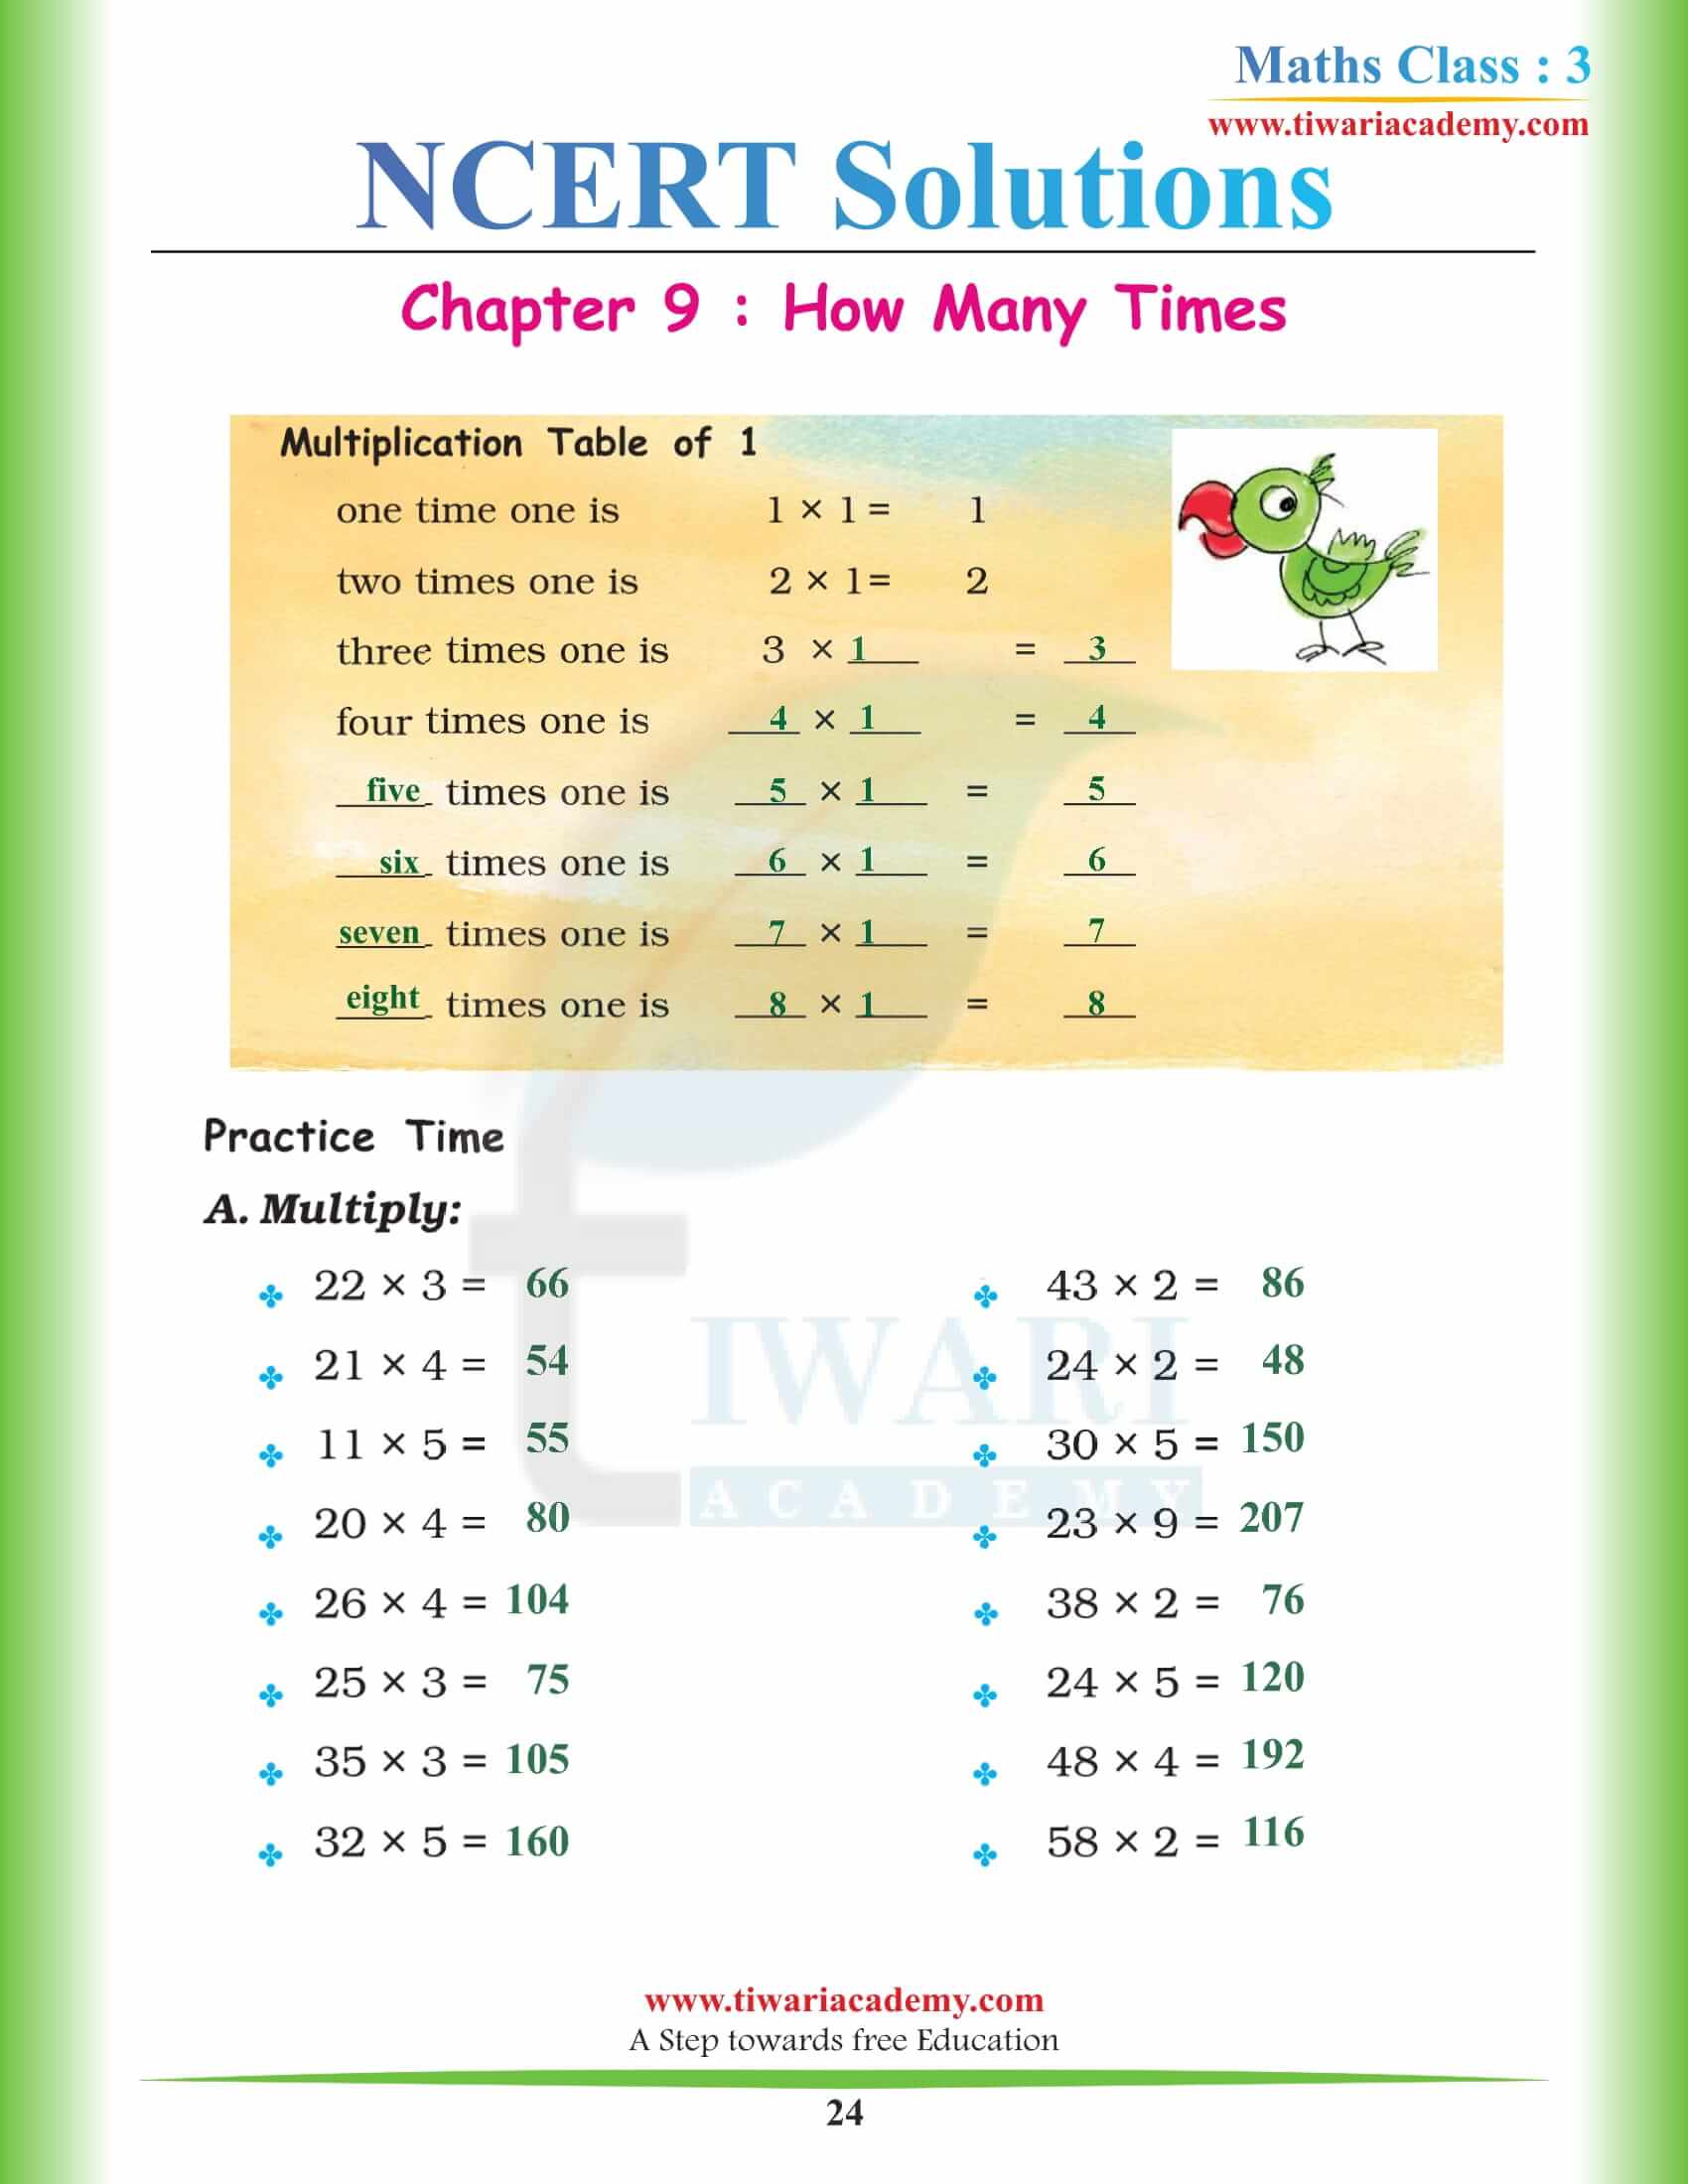 Standard 3 Maths NCERT Chapter 9 Solutions in PDF free